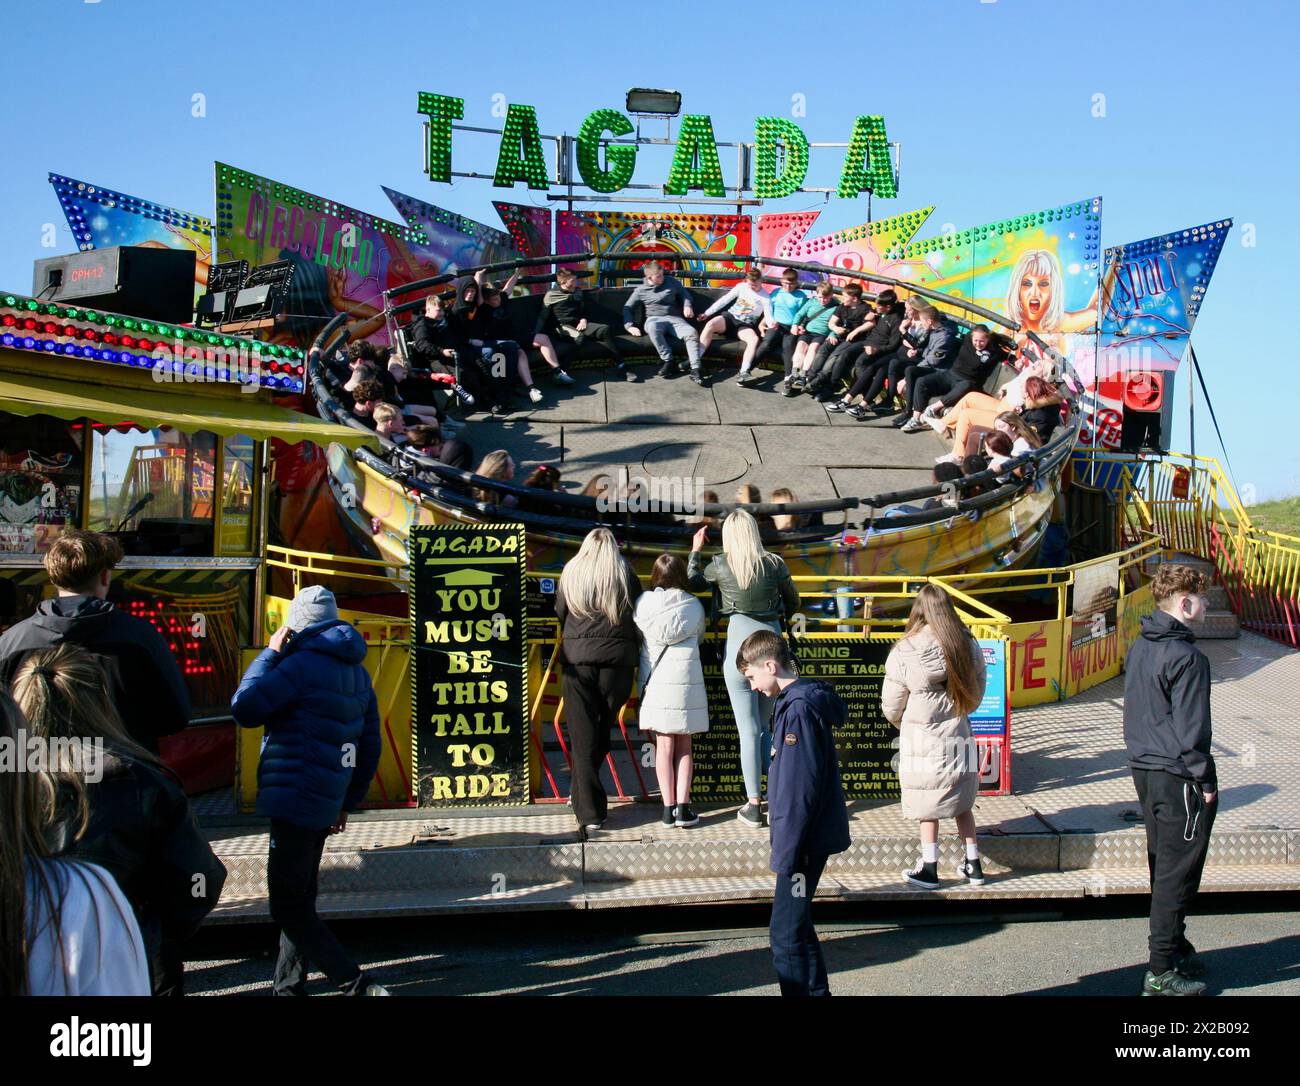 A view of the TAGADA, one of Taylor's Funfair rides, at the seaside resort of Fleetwood, on the Lancashire coast, United Kingdom, Europe Stock Photo